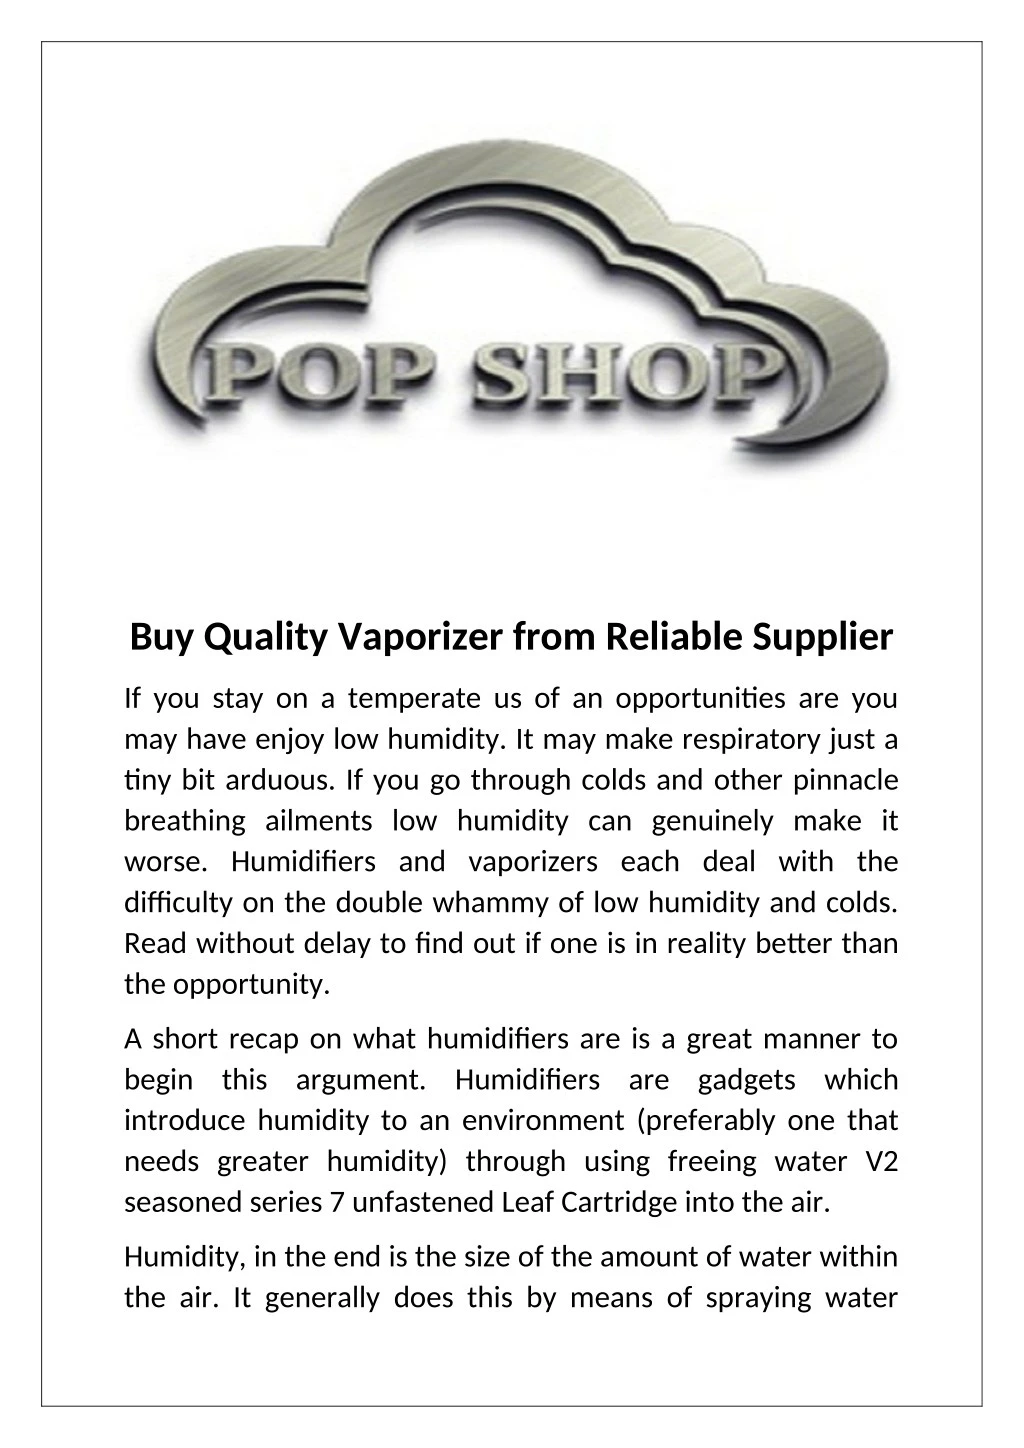 buy quality vaporizer from reliable supplier